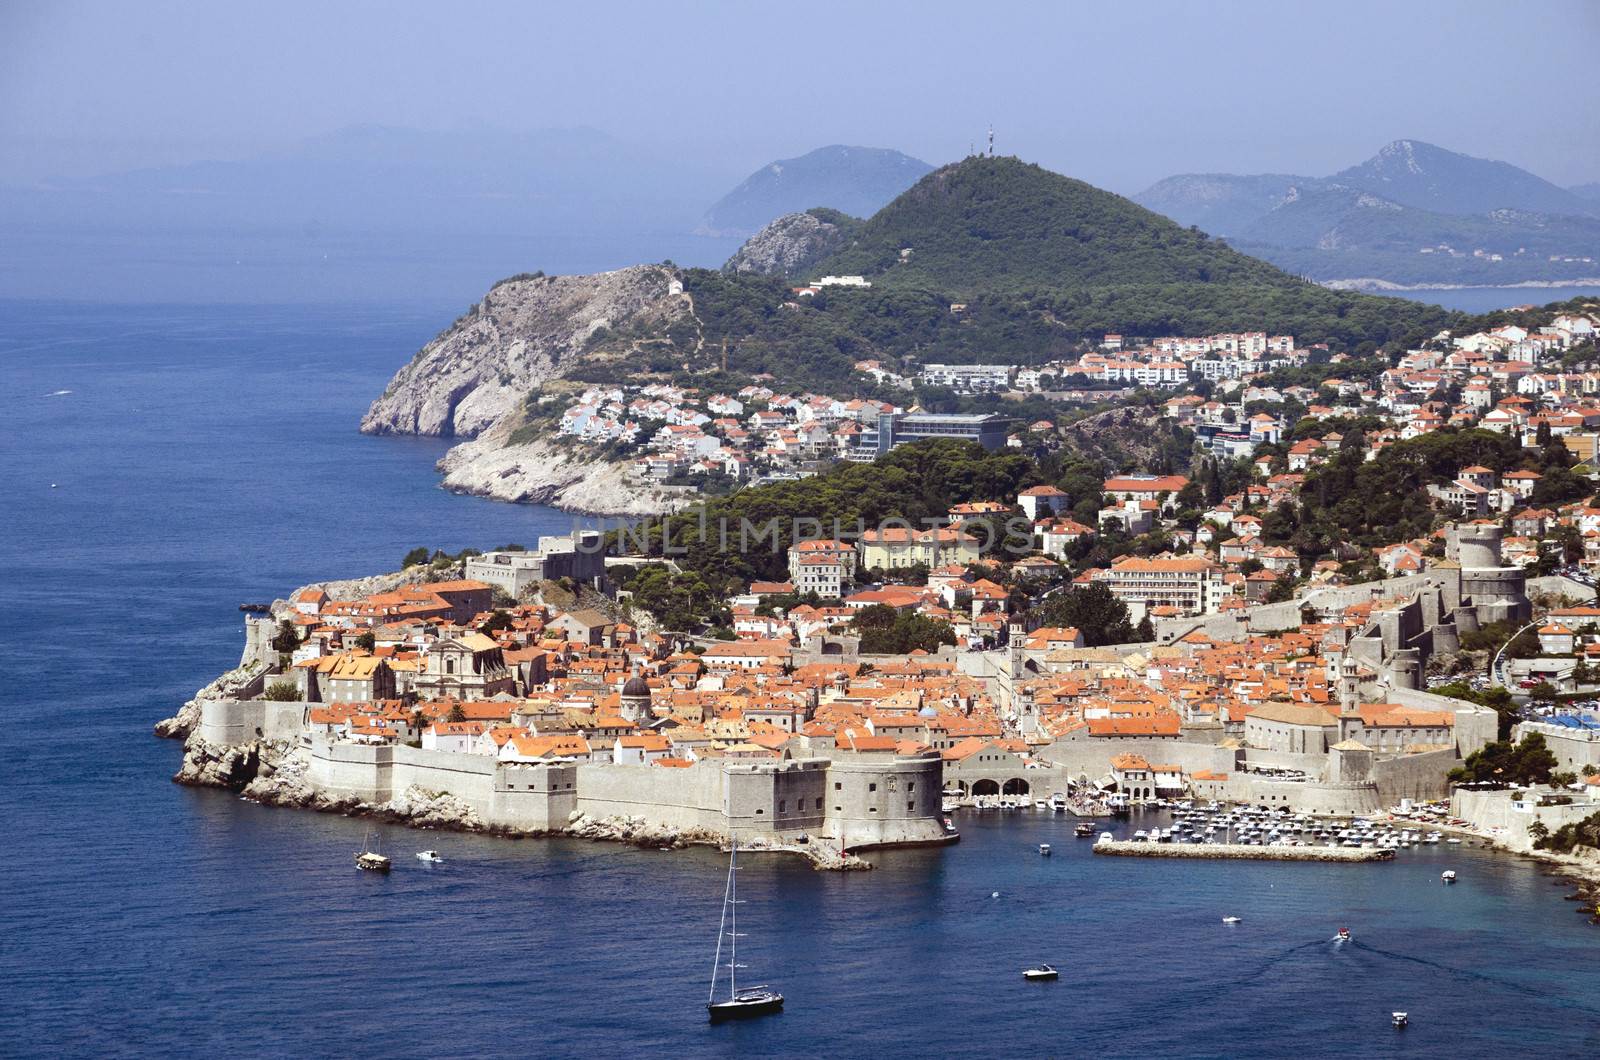 Aerial view over city of Dubrovnik and its surroundings, Croatia, Europe.